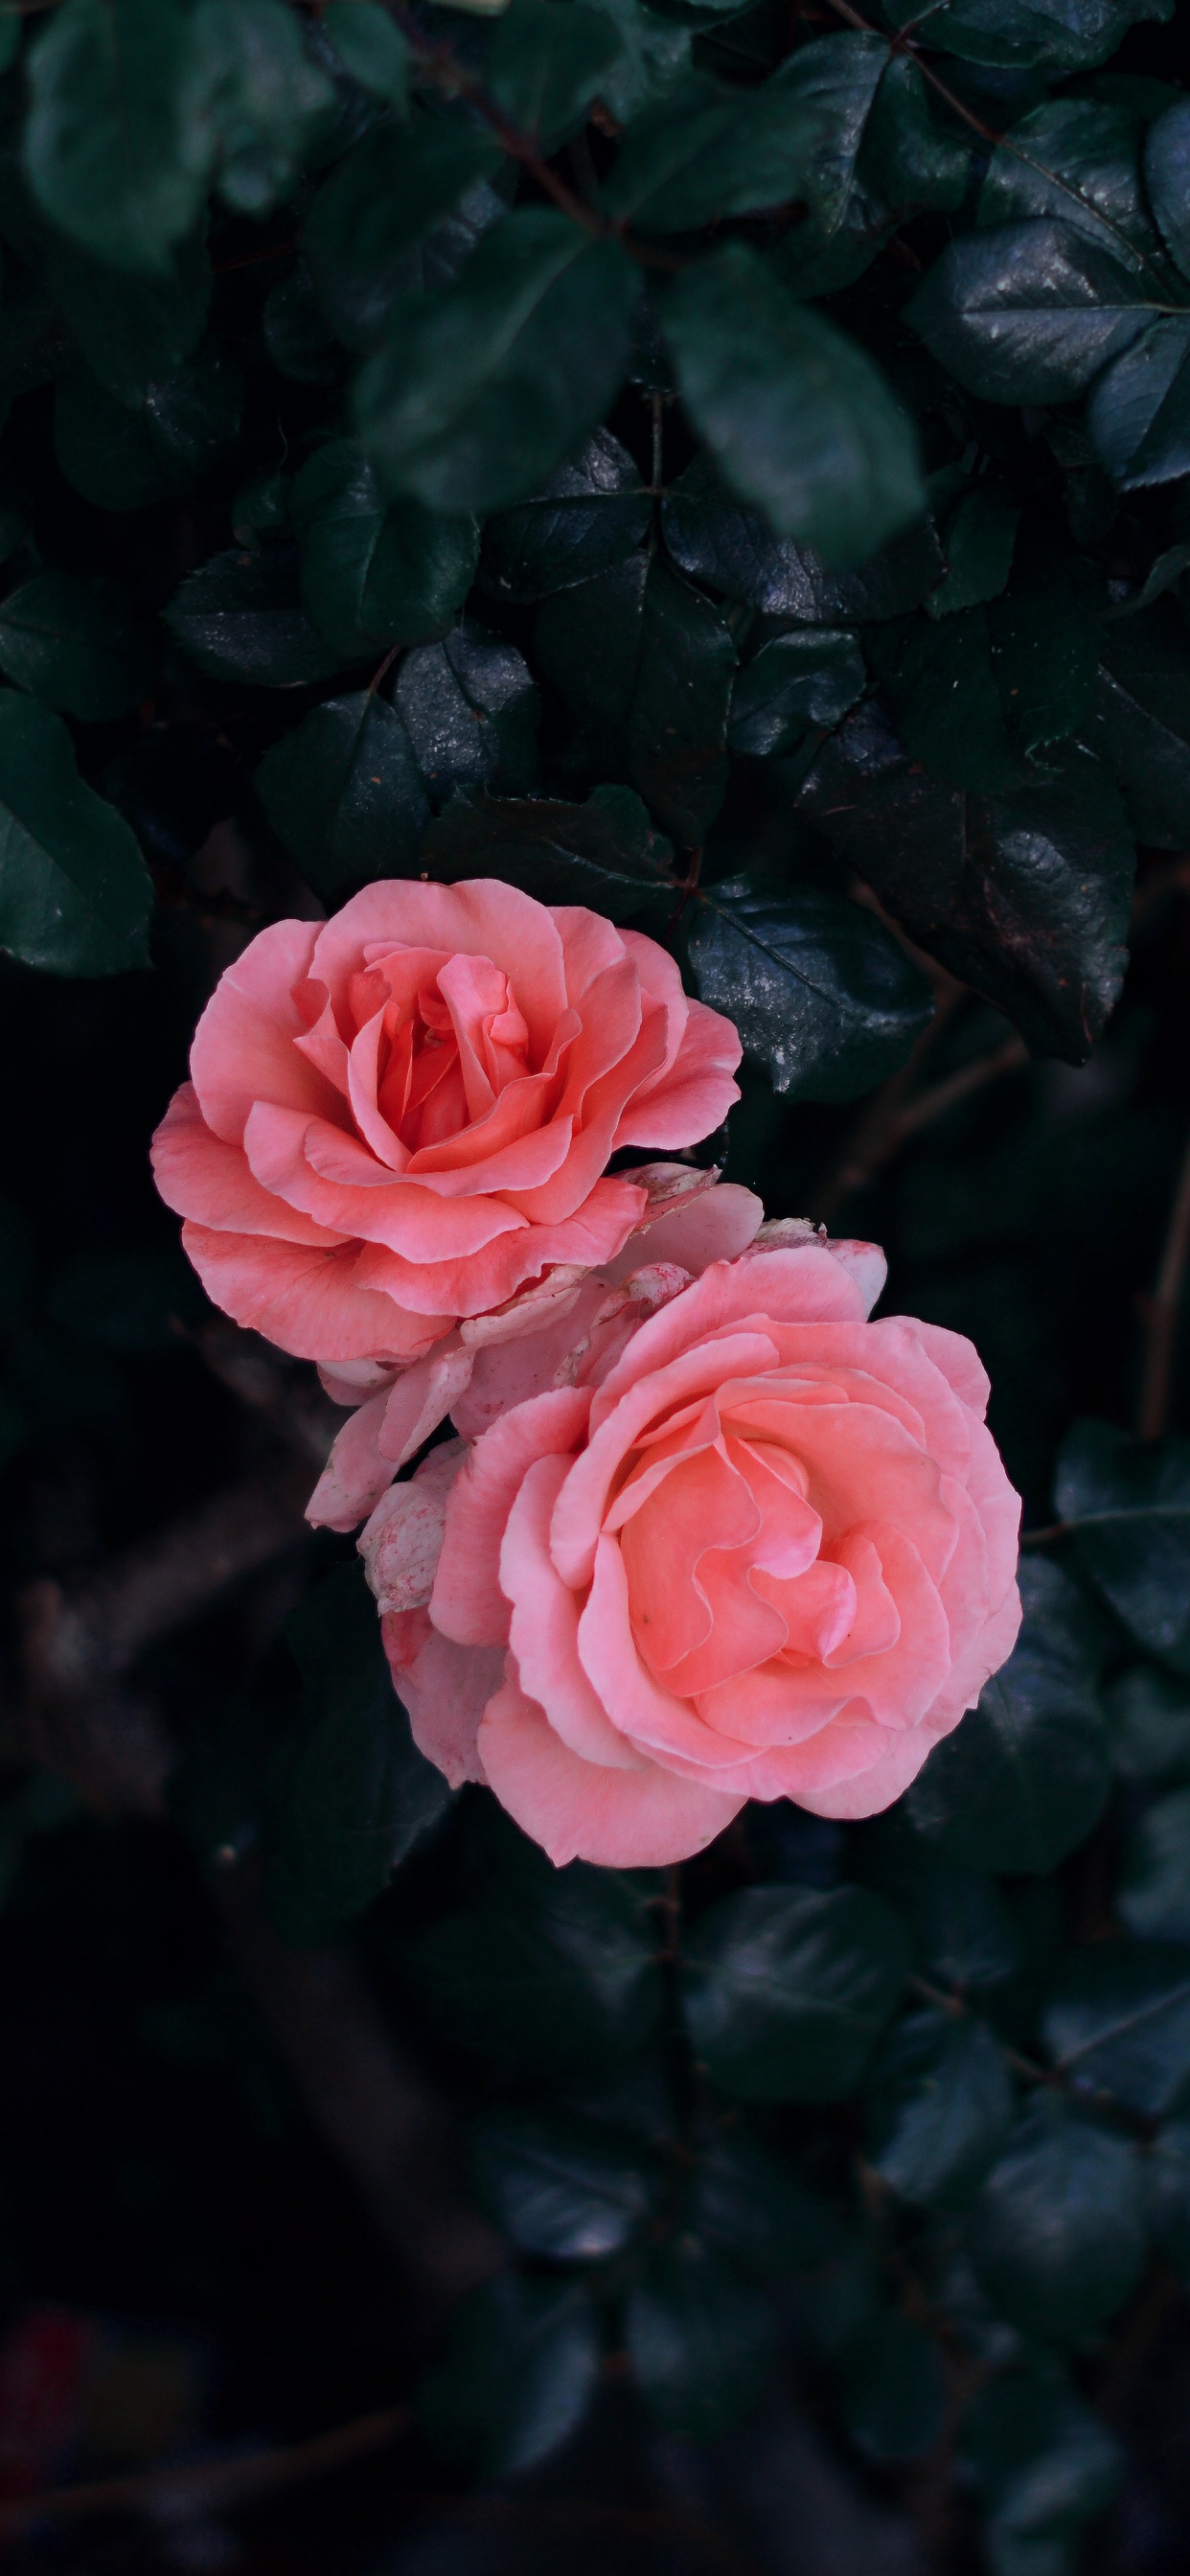 Pink Rose in Bloom During Daytime. Wallpaper in 1242x2688 Resolution